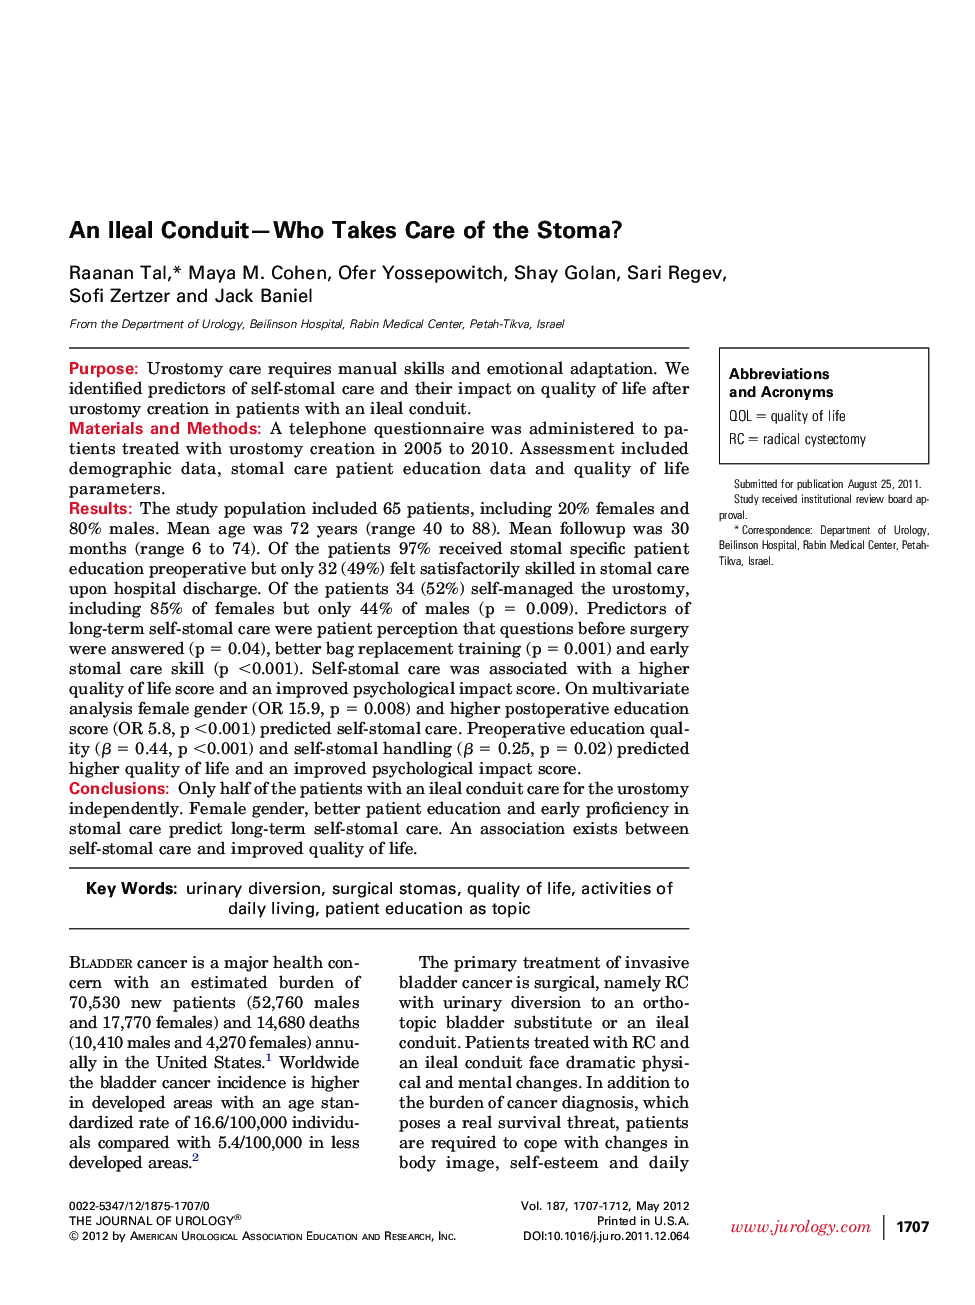 An Ileal Conduit—Who Takes Care of the Stoma? 